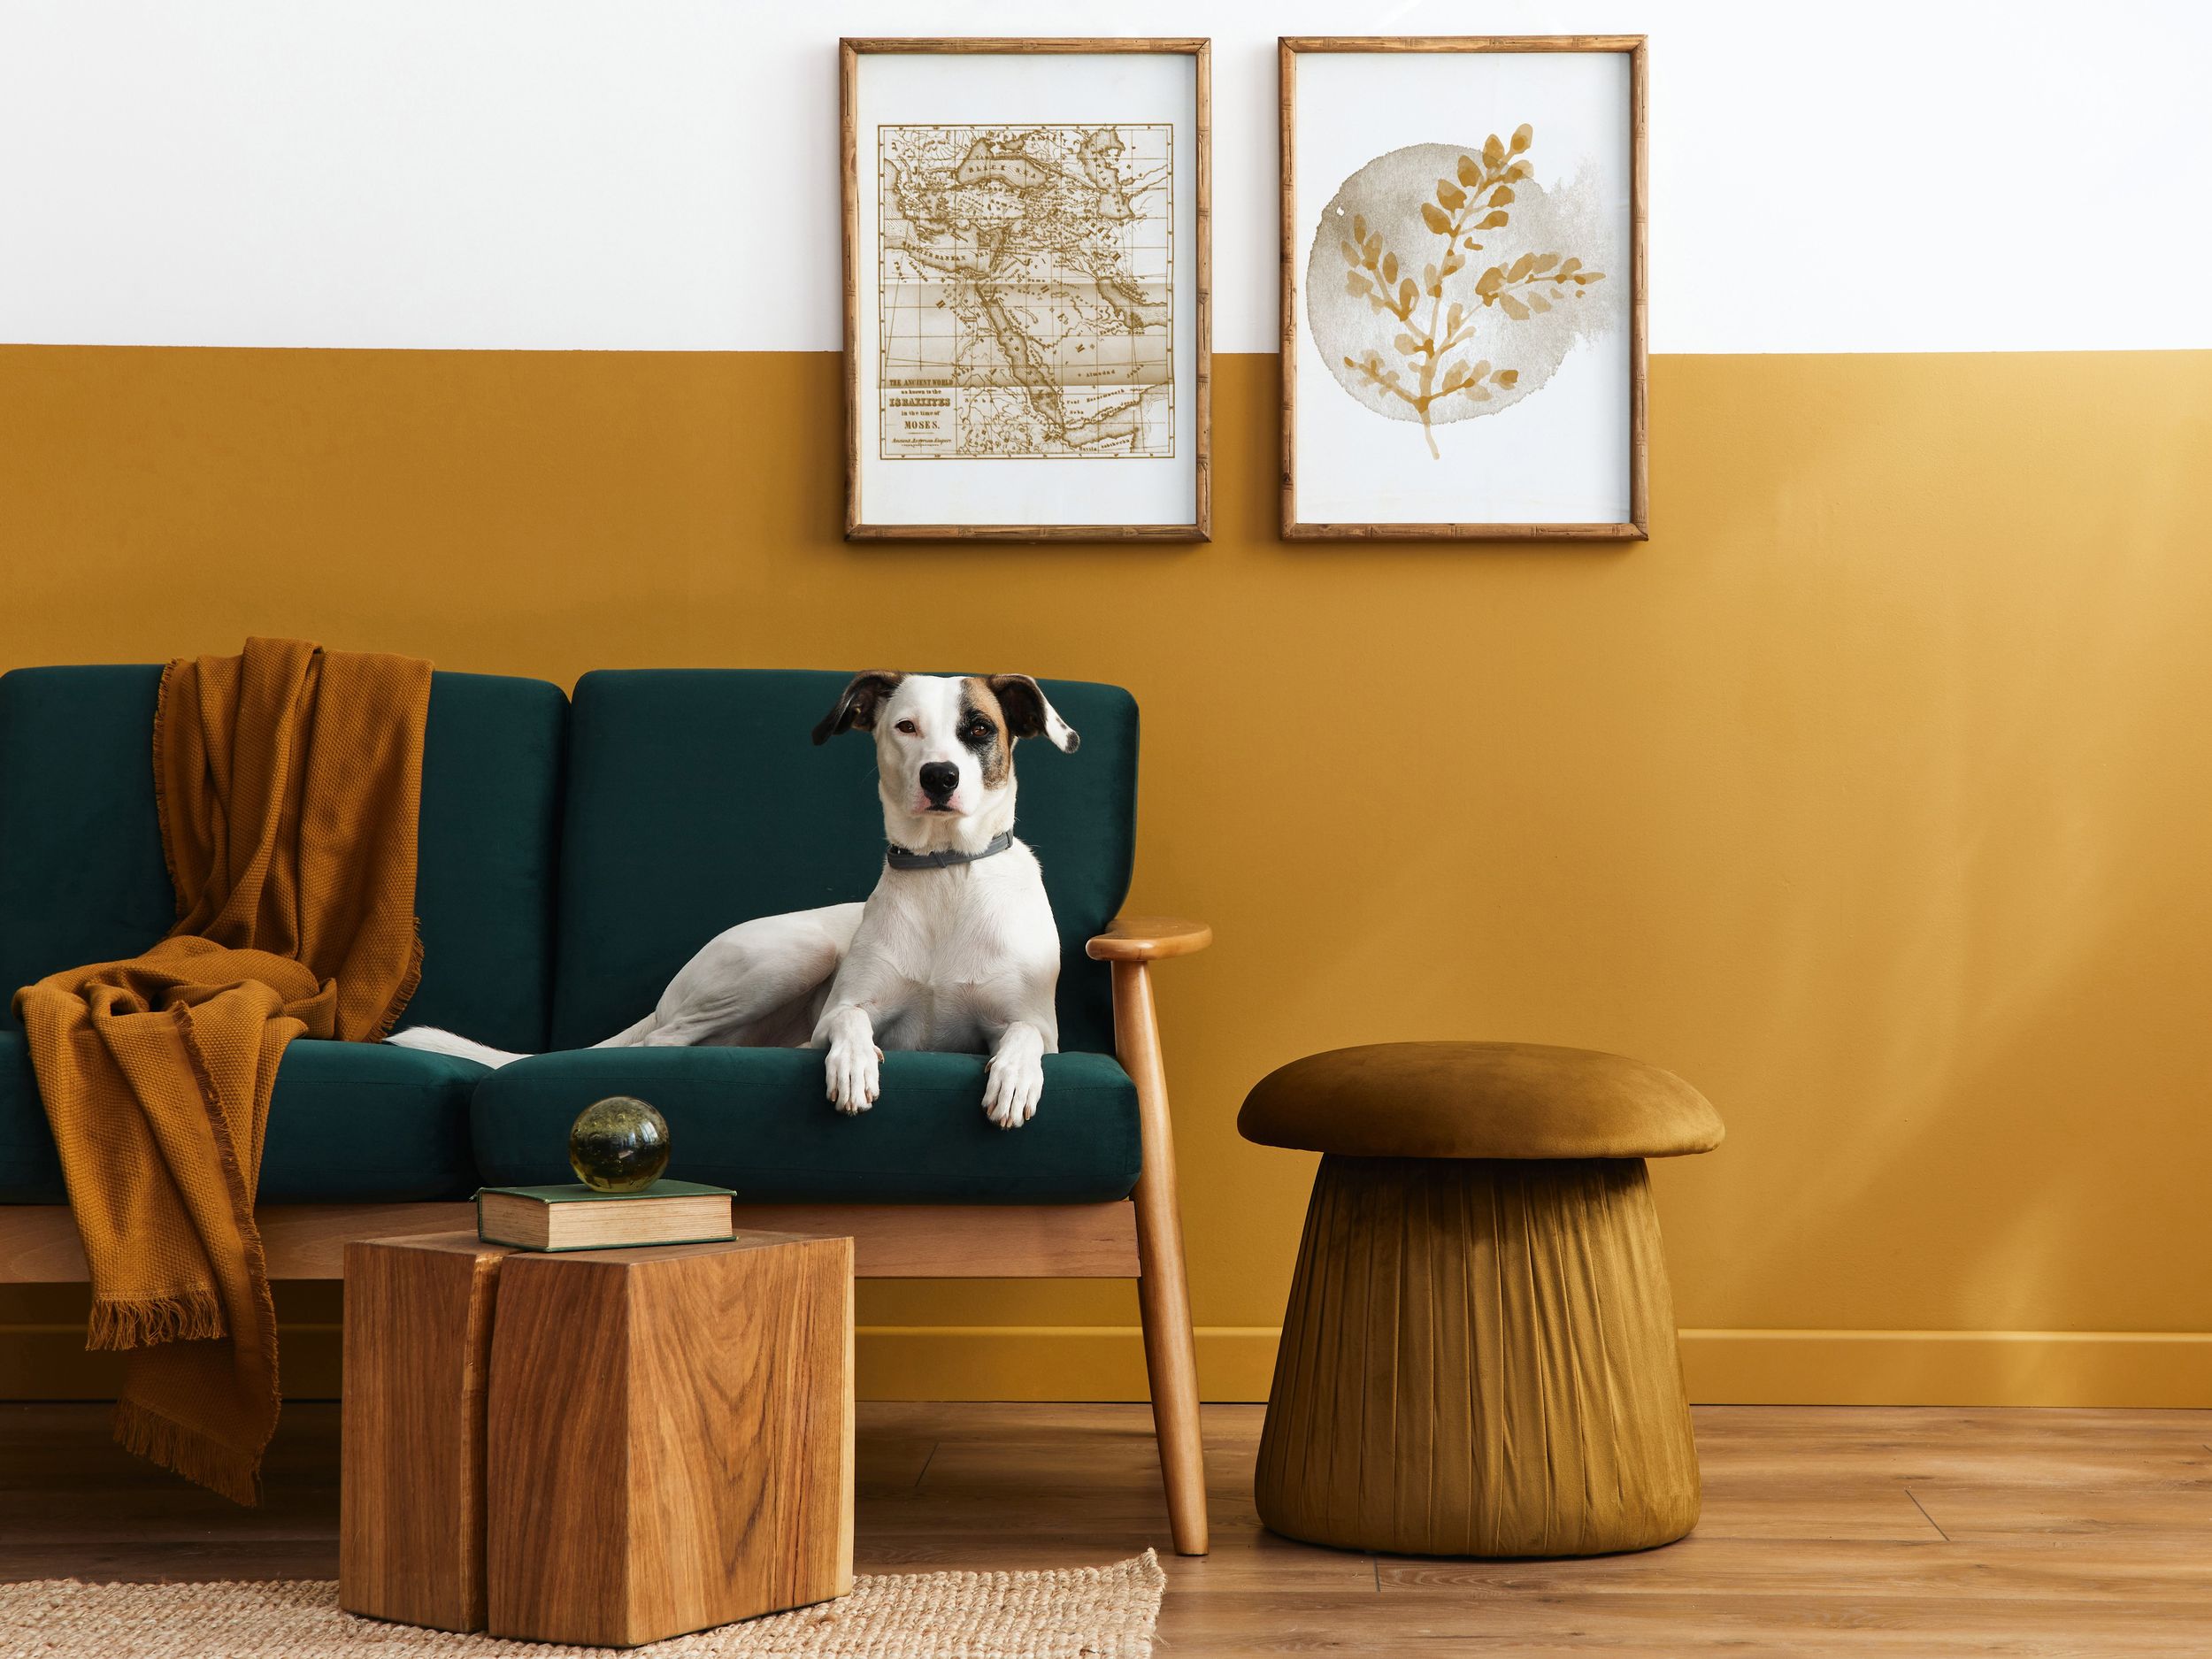 The best pet-friendly fabrics and finishes to protect your